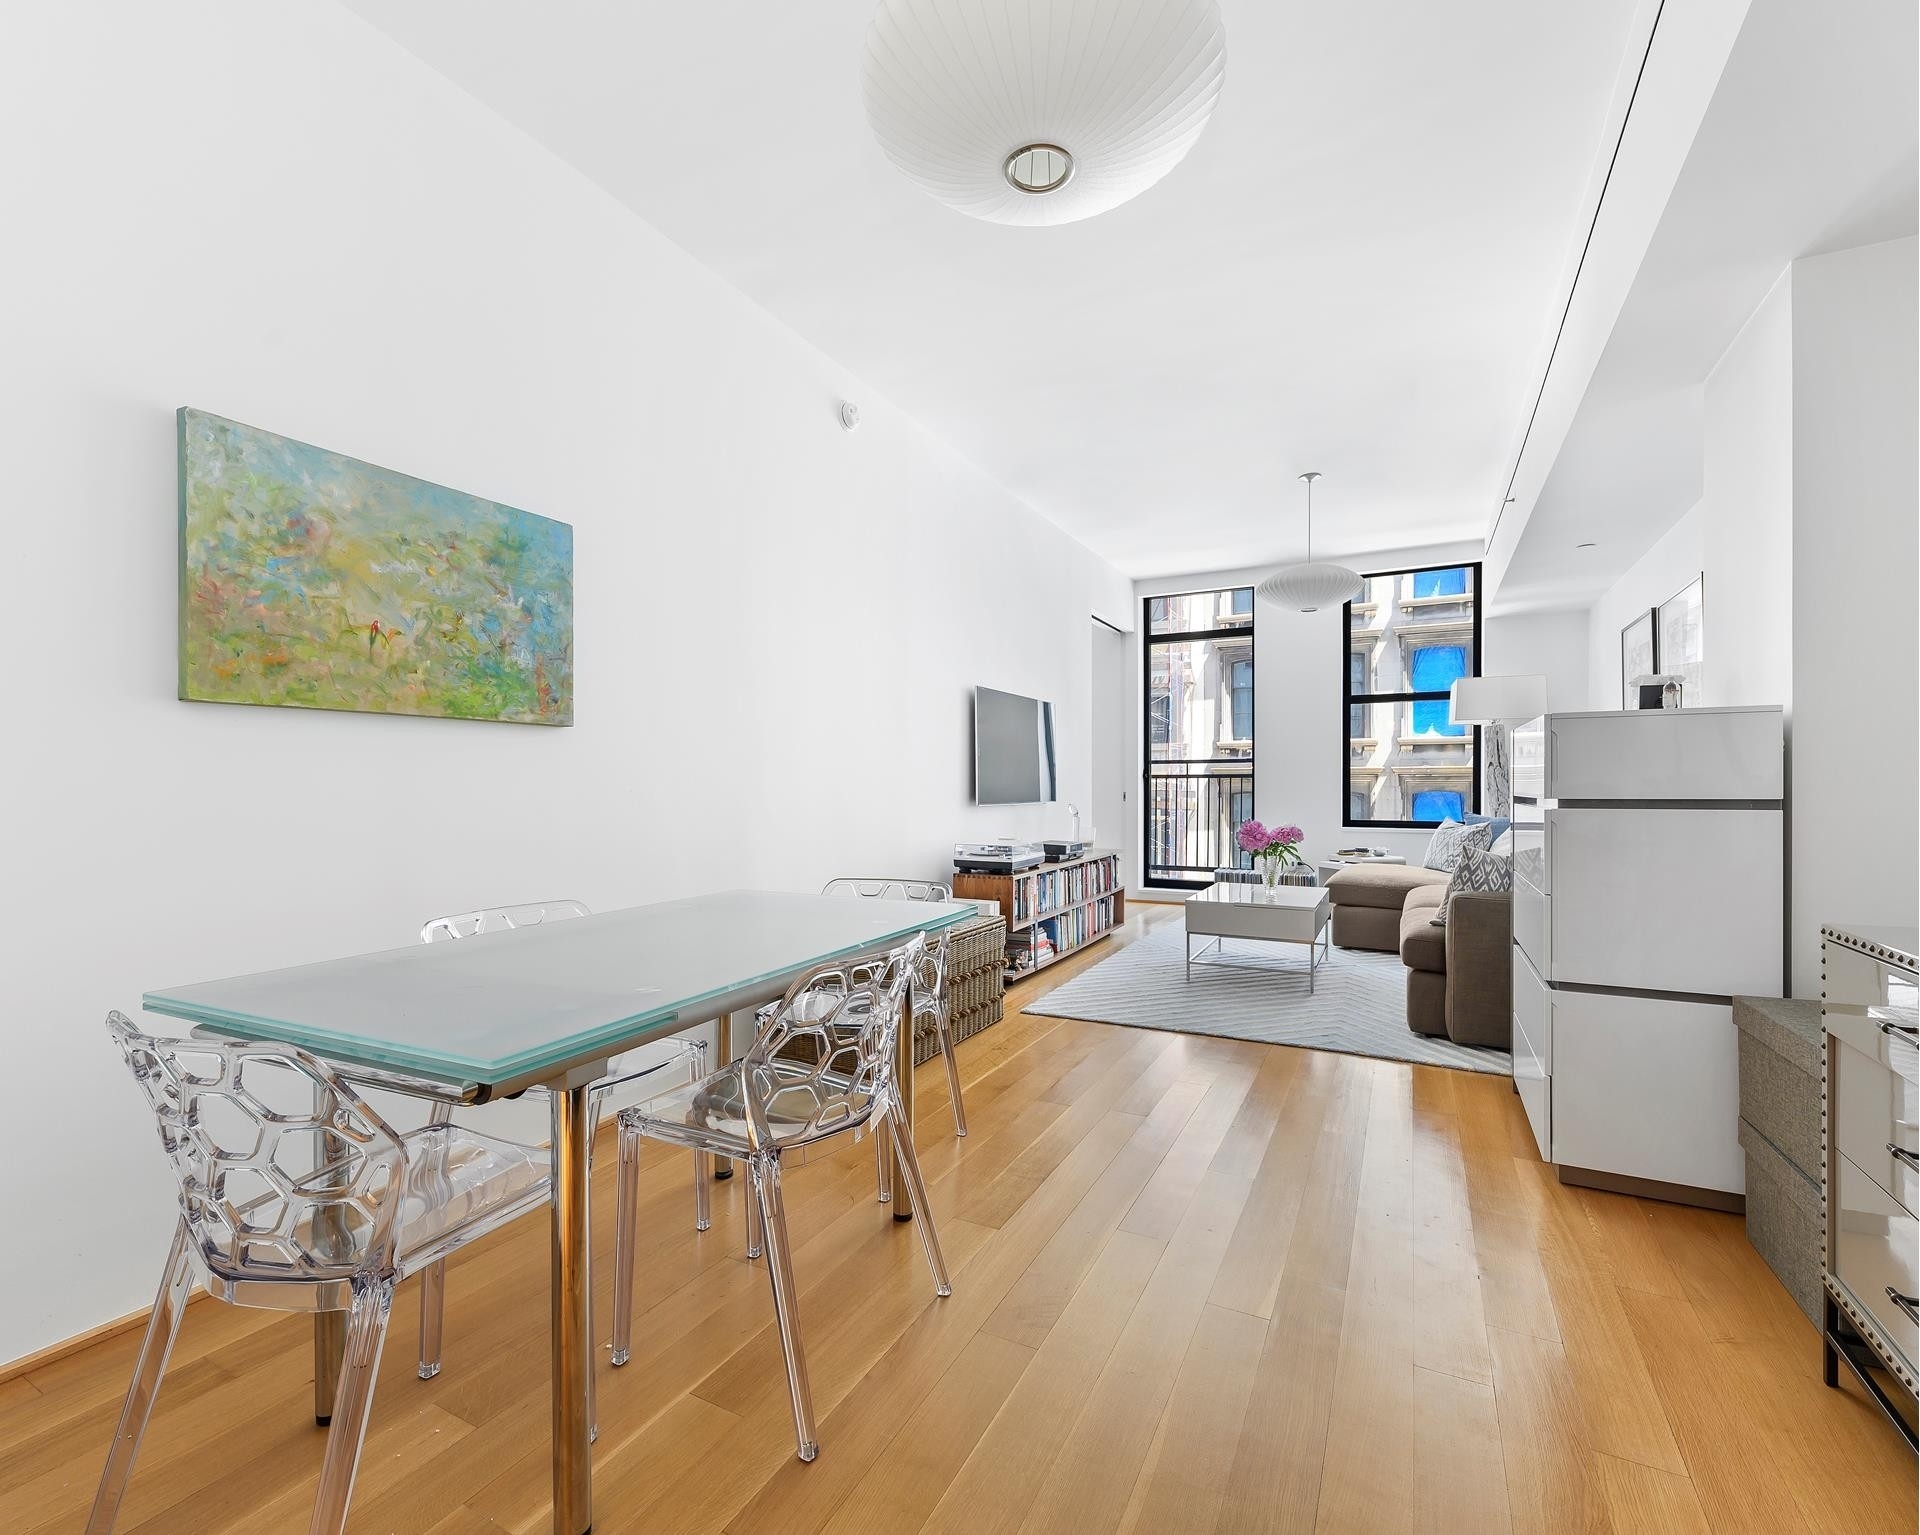 Property at Reade Chambers, 71 Reade St, 3A New York